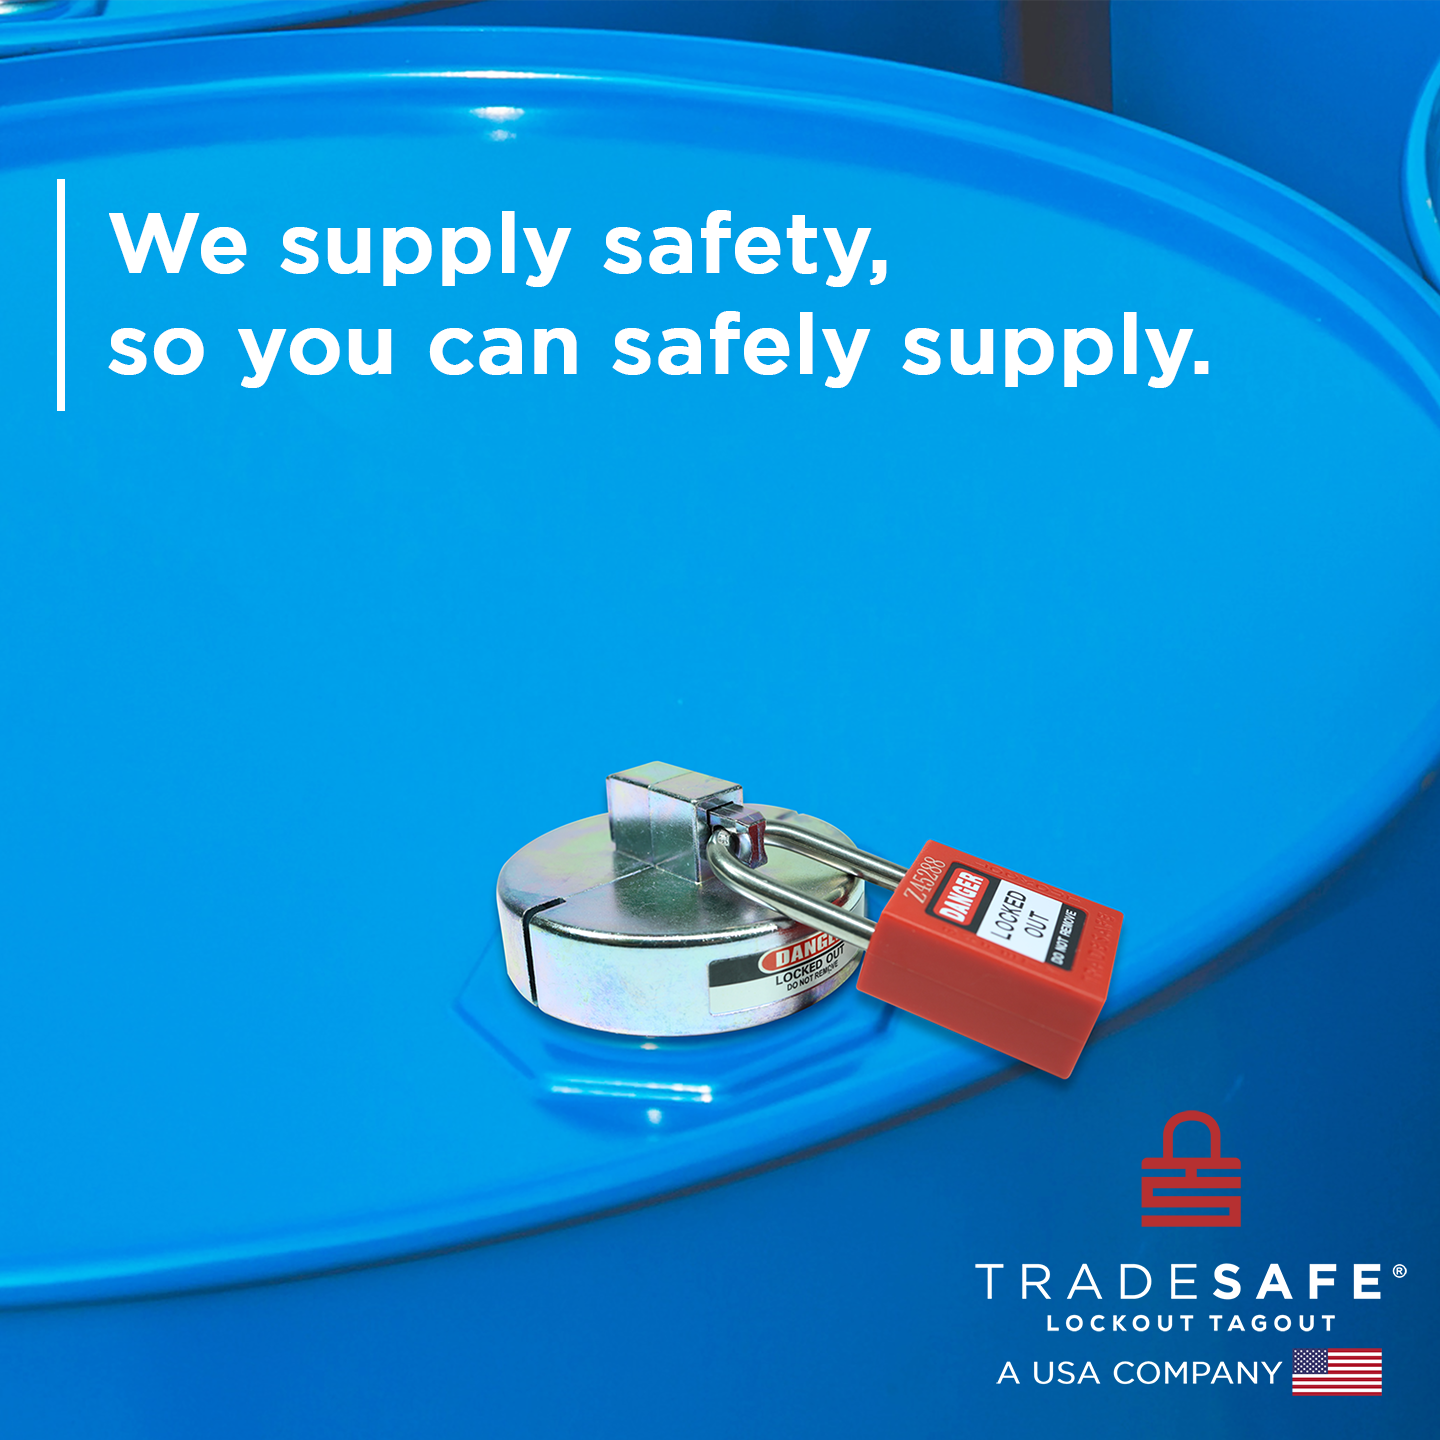 tradesafe drum lockout: we supply safety, so you can safely supply